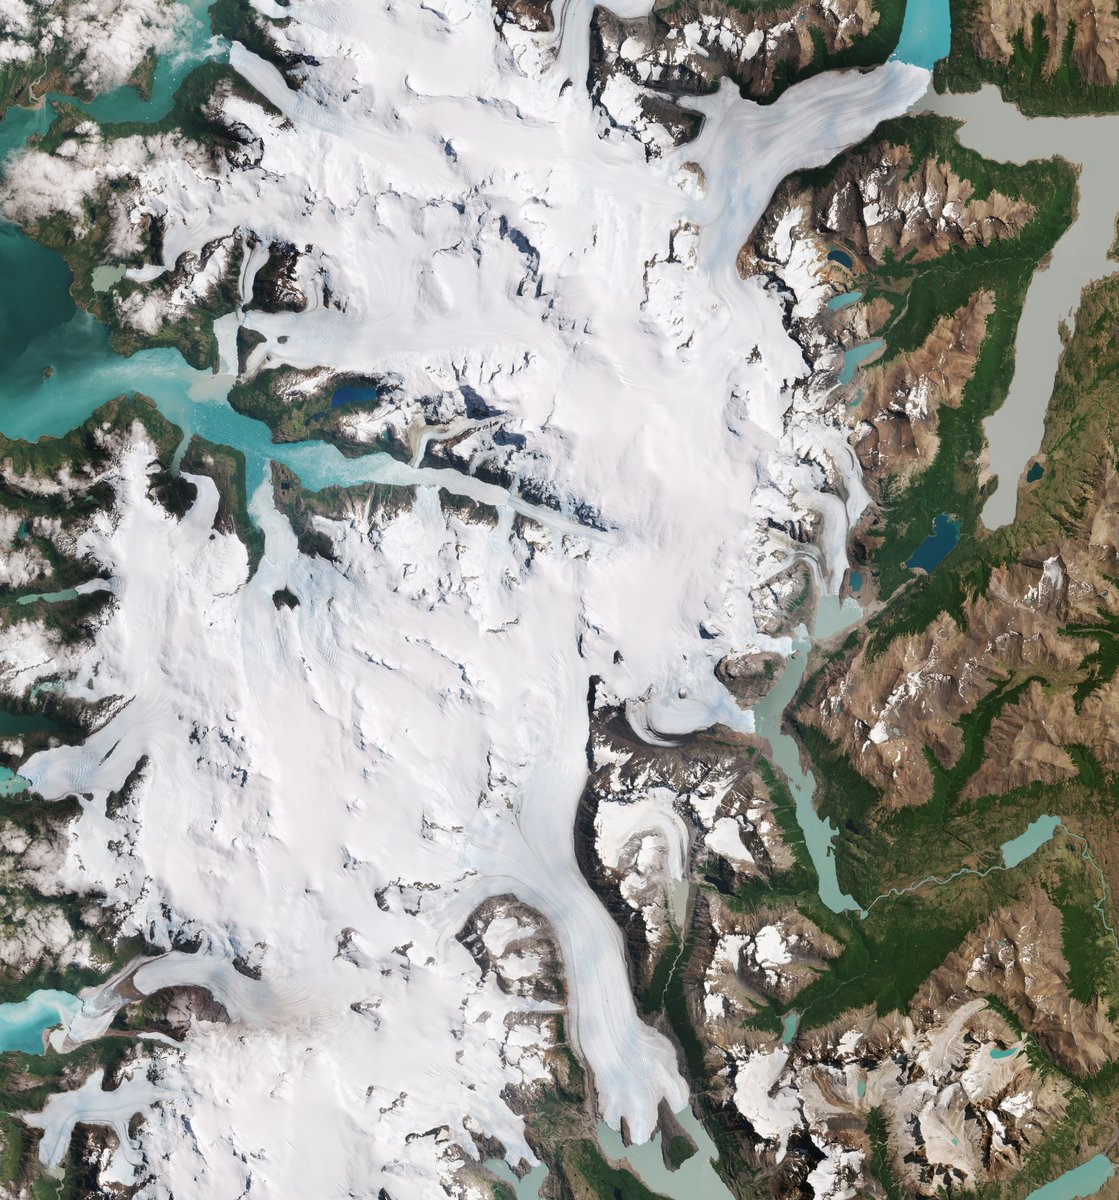 ☃  Part of the Southern Patagonian Ice Field with its white glaciers and aquamarine lakes is featured in this @CopernicusEU #Sentinel2 image.

Zoom in to explore this image at its full 10 m resolution here 👉 esa.int/ESA_Multimedia…